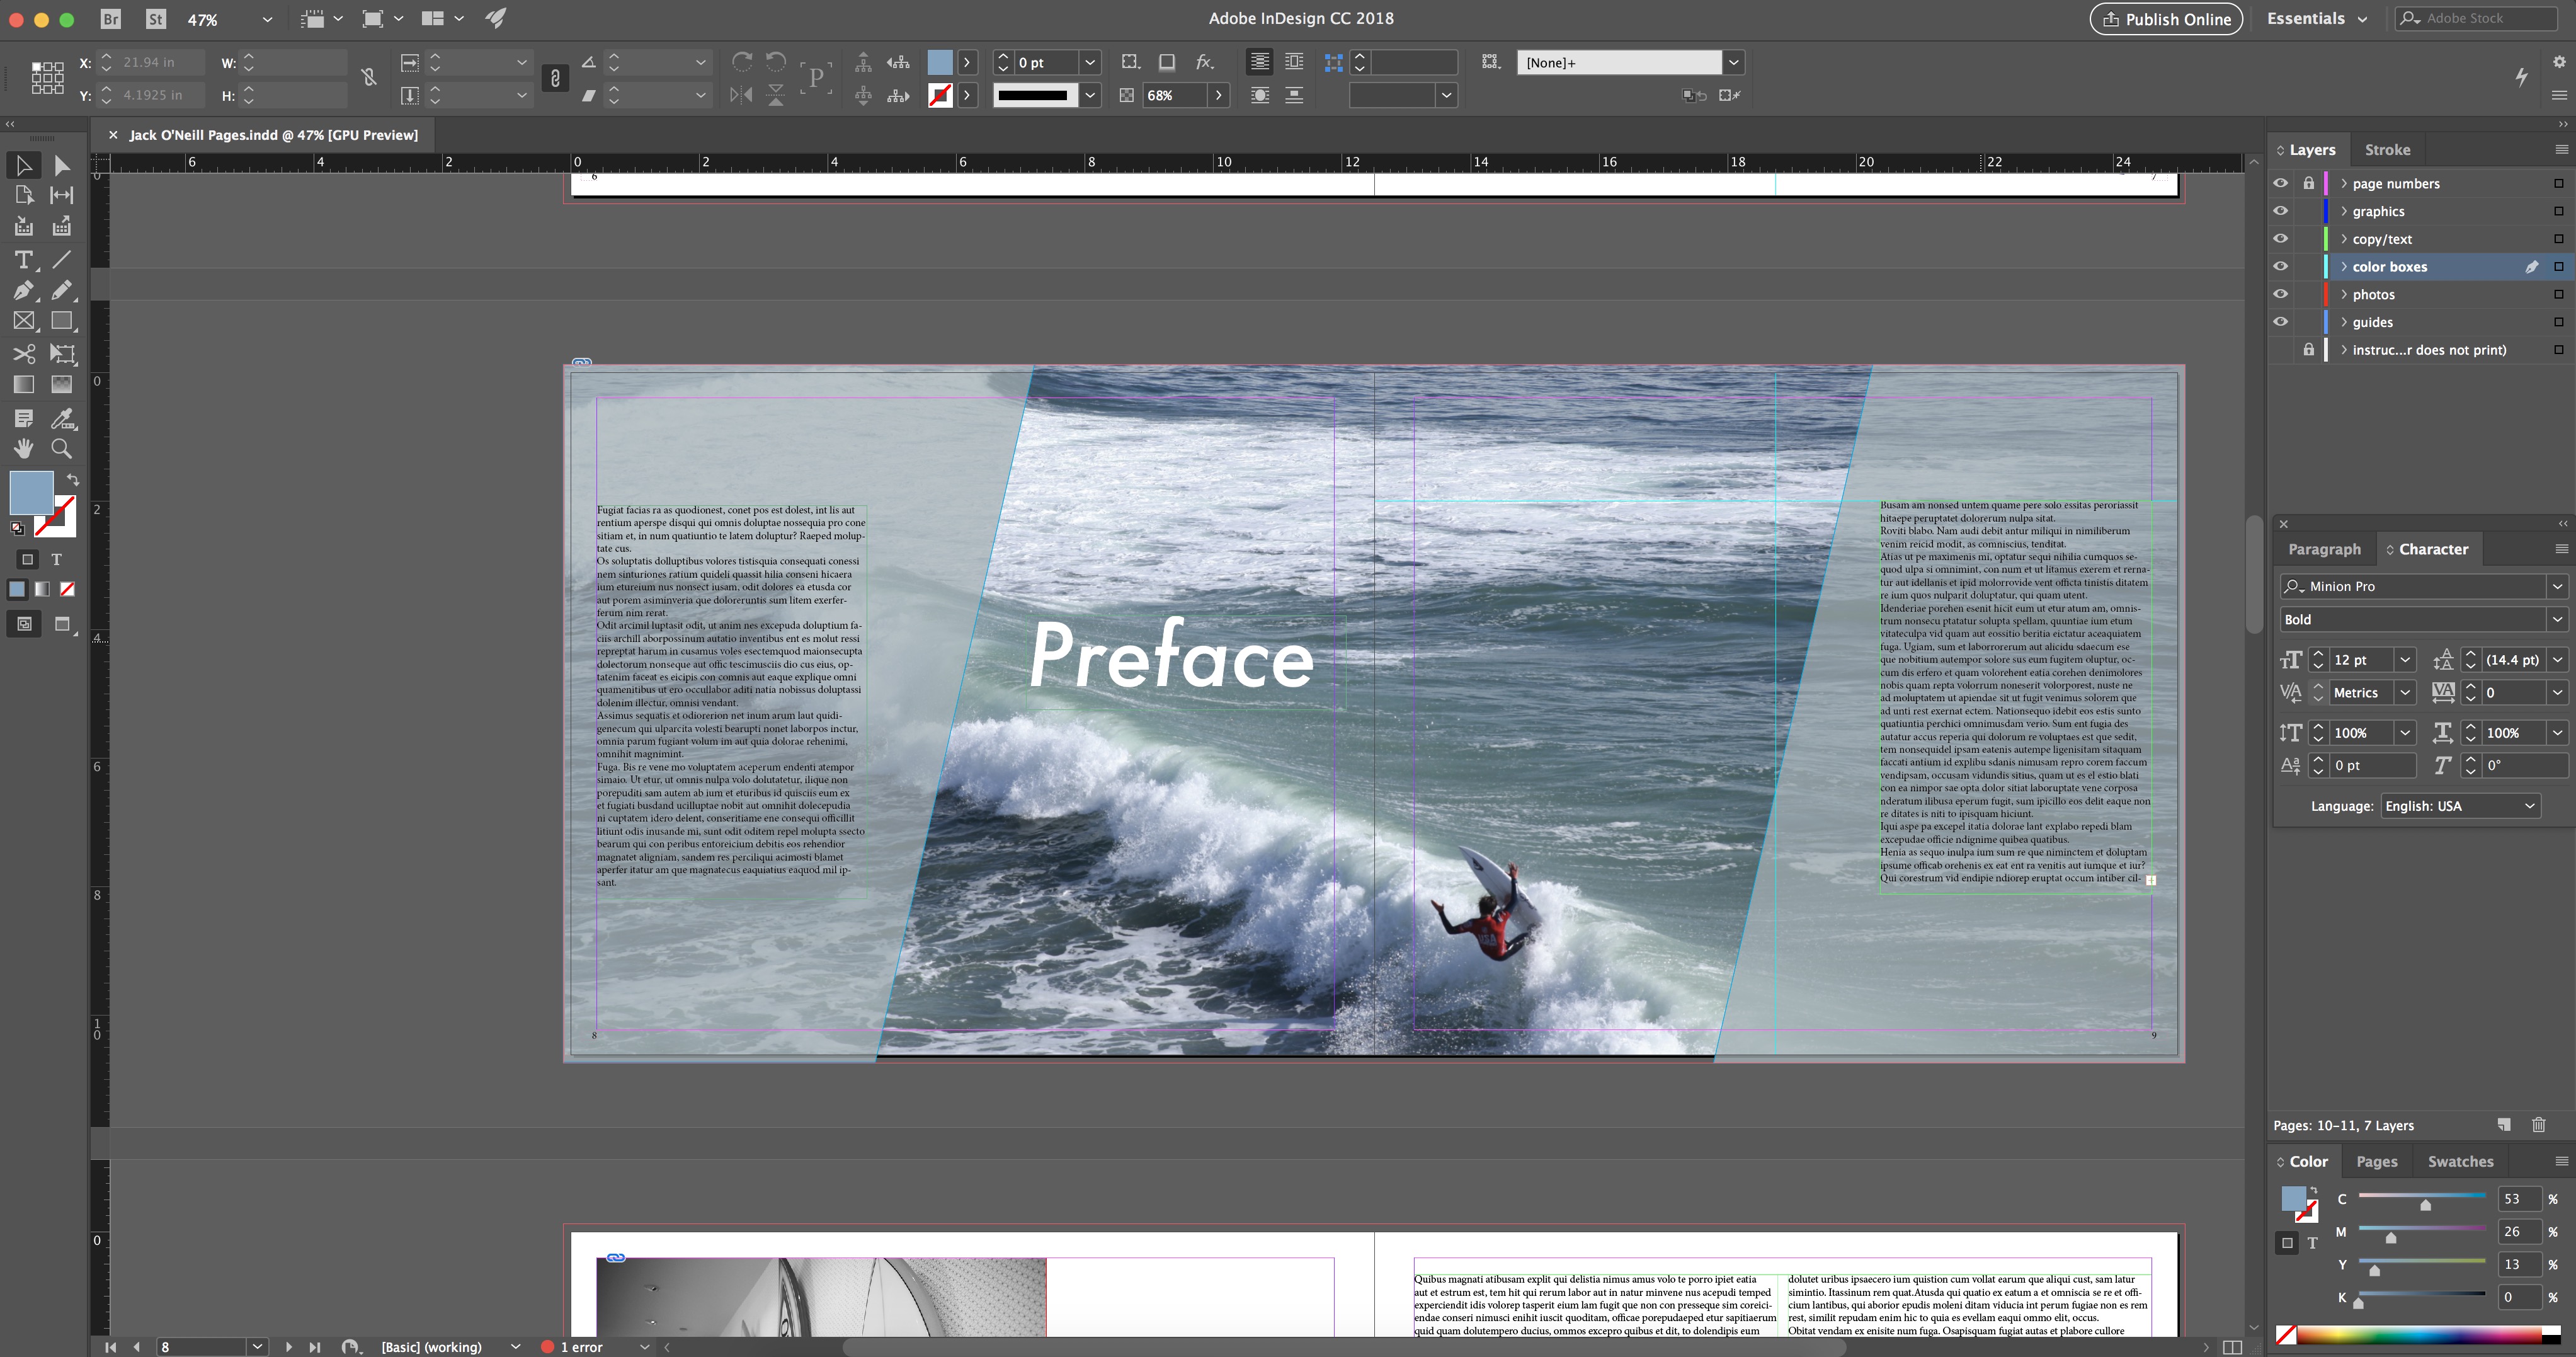 This is a screenshot of my work in InDesign.